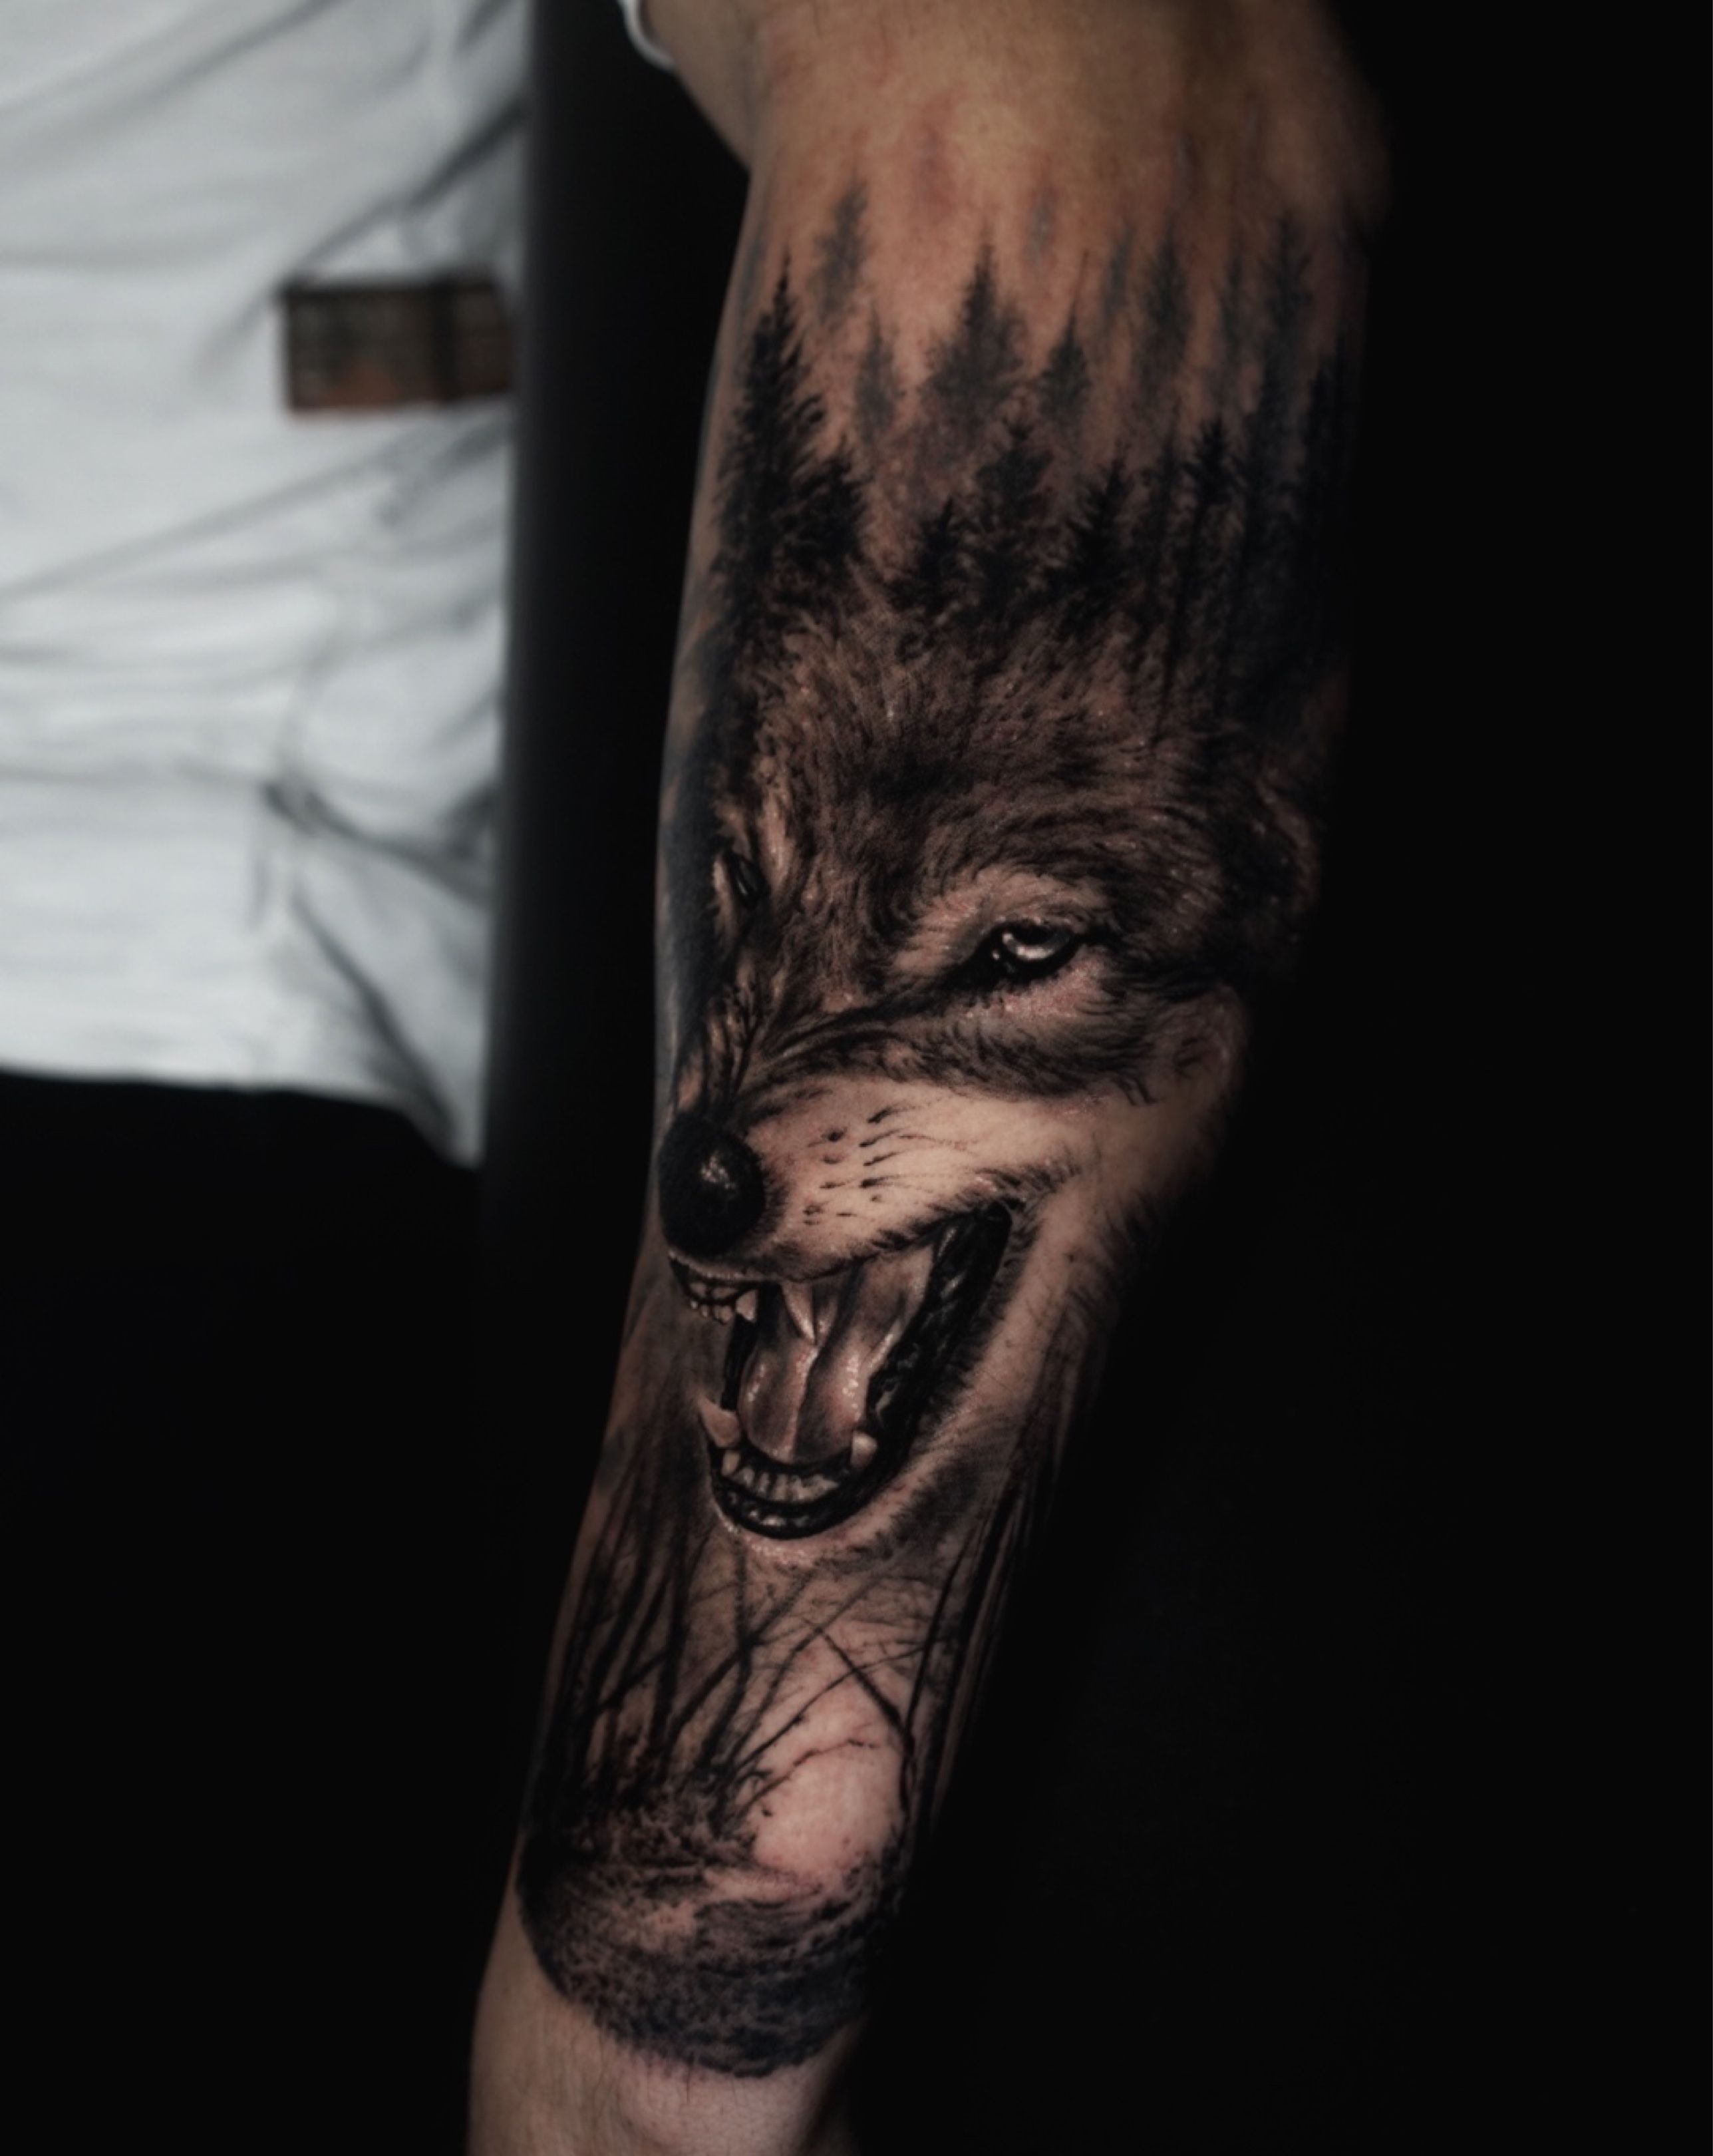 Aliens Tattoo - The wolf is an immensely popular, enduring... | Facebook